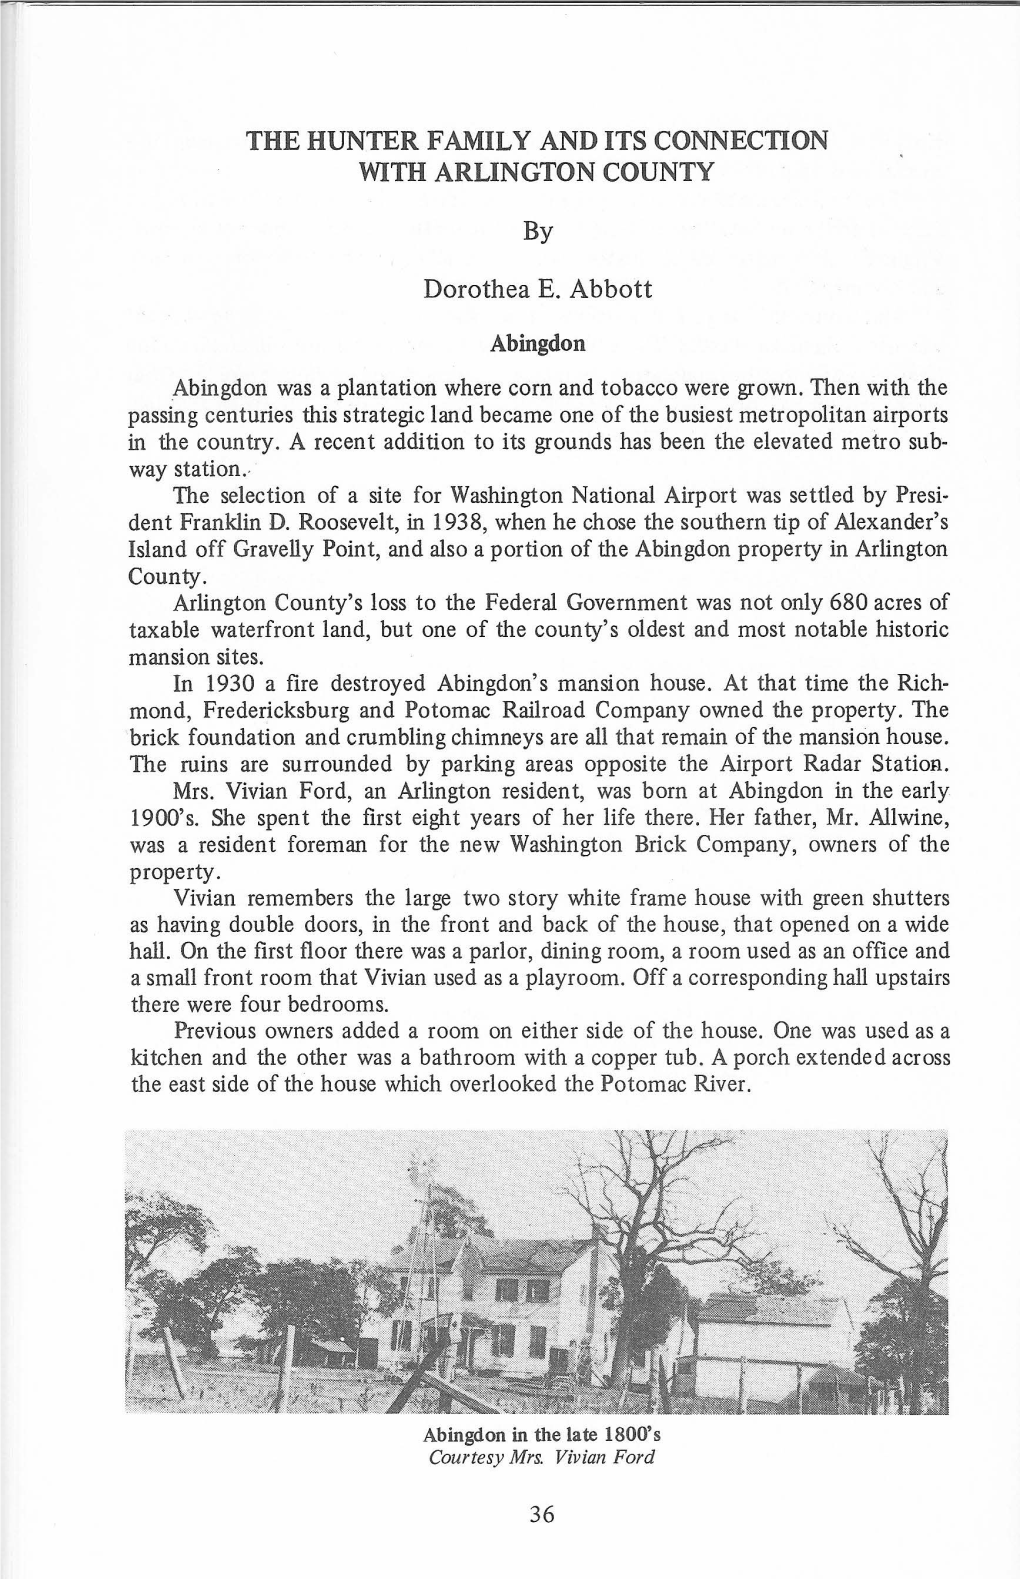 THE HUNTER FAMILY and ITS CONNECTION with ARLINGTON COUNTY Dorothea E. Abbott